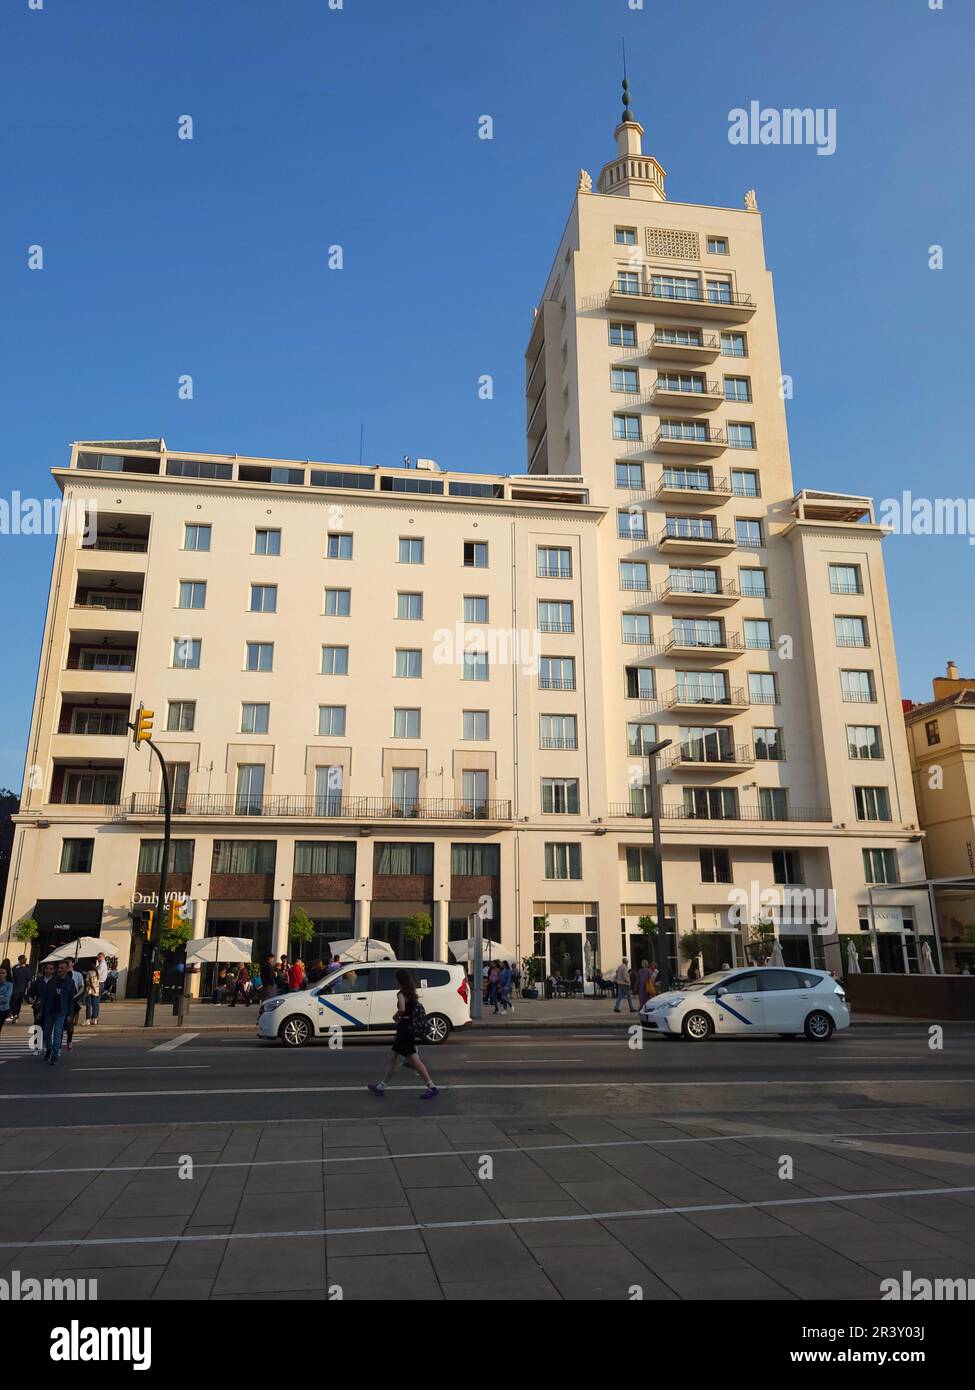 La Equitativa building built in 1956. Now home of Only You and Soho Boutique Equitativa Hotels. Málaga, Spain. Stock Photo